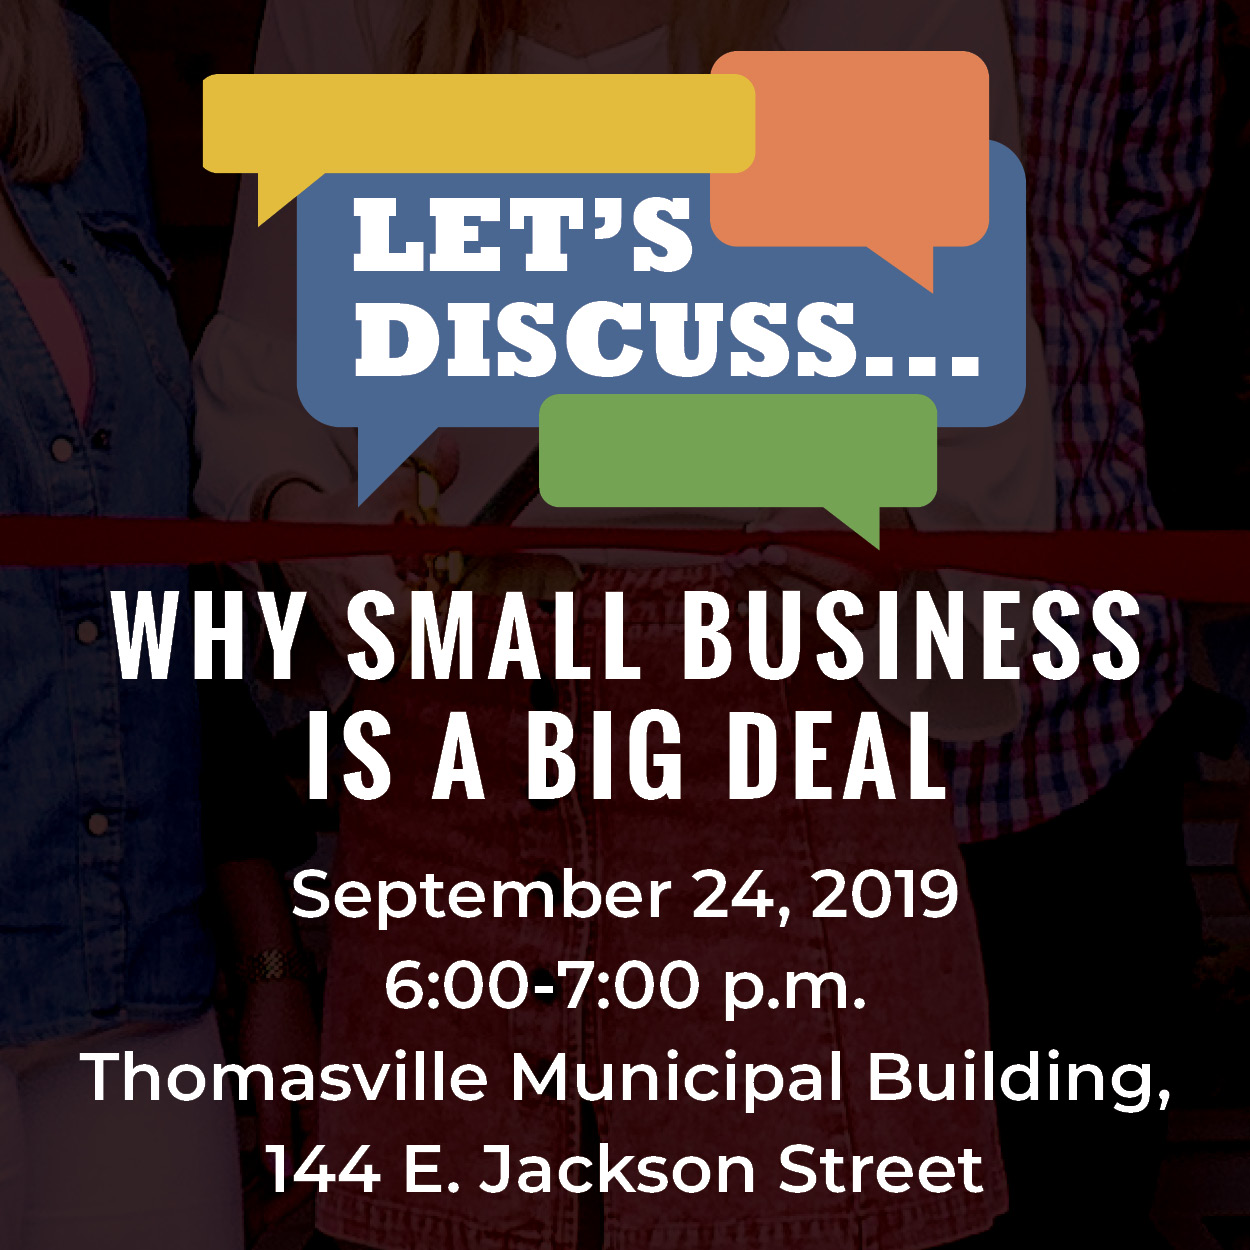 Photo for CITY&rsquo;S NEXT &ldquo;LET&rsquo;S DISCUSS &hellip;&rdquo; SESSION TO FOCUS ON THE IMPORTANCE OF SMALL BUSINESS AND DOWNTOWN THOMASVILLE